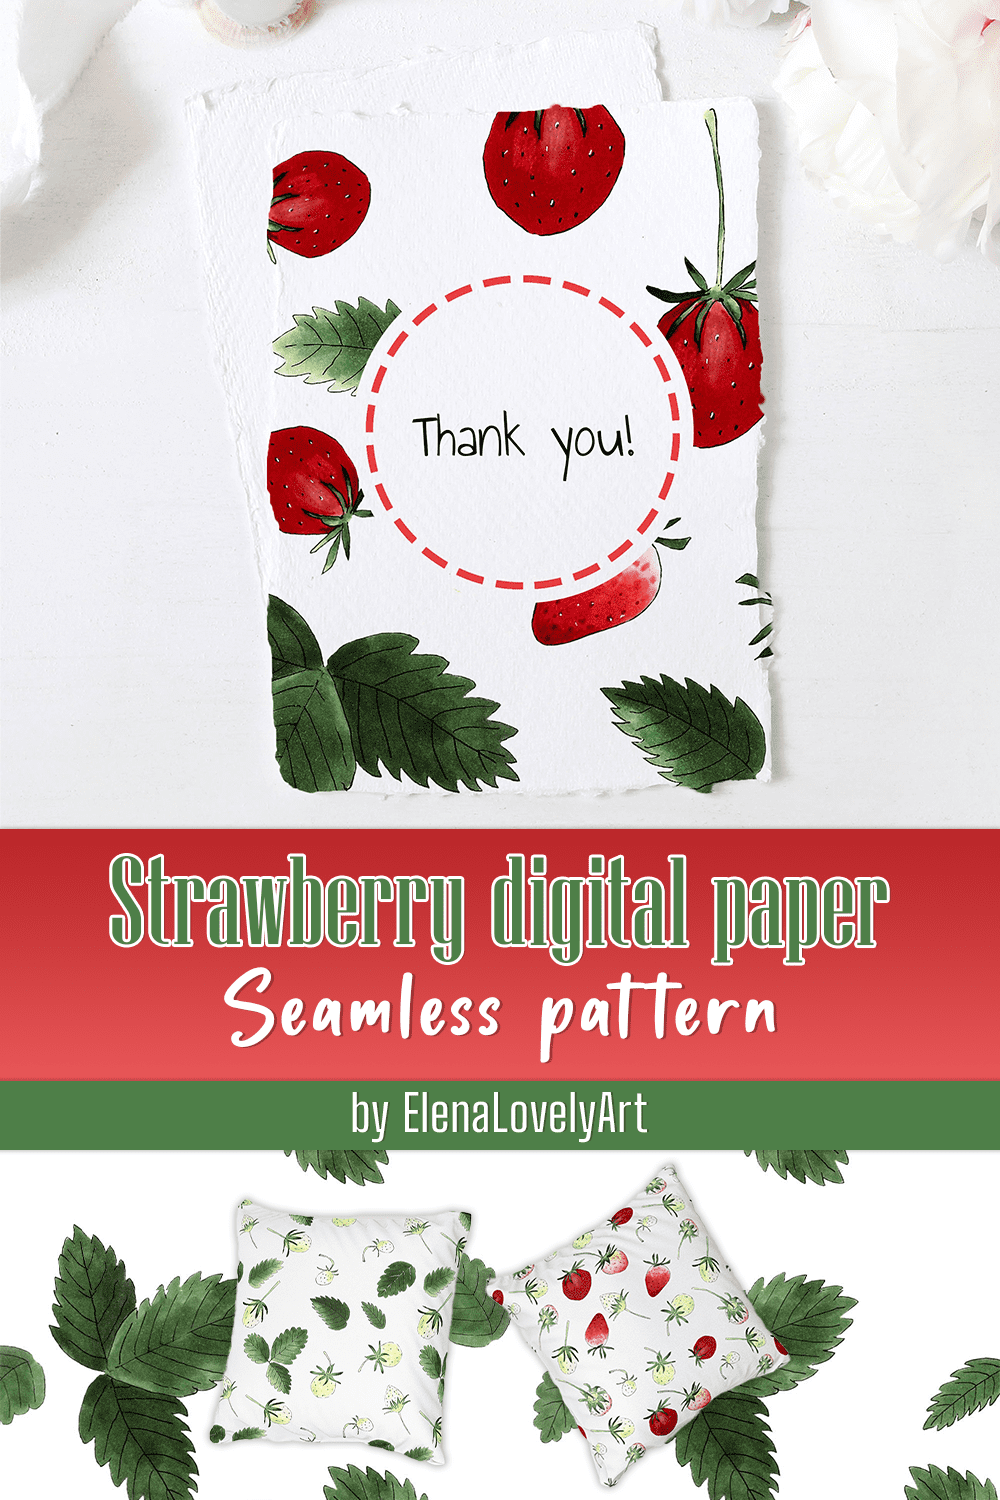 Strawberry Digital Paper - pinterest image preview.